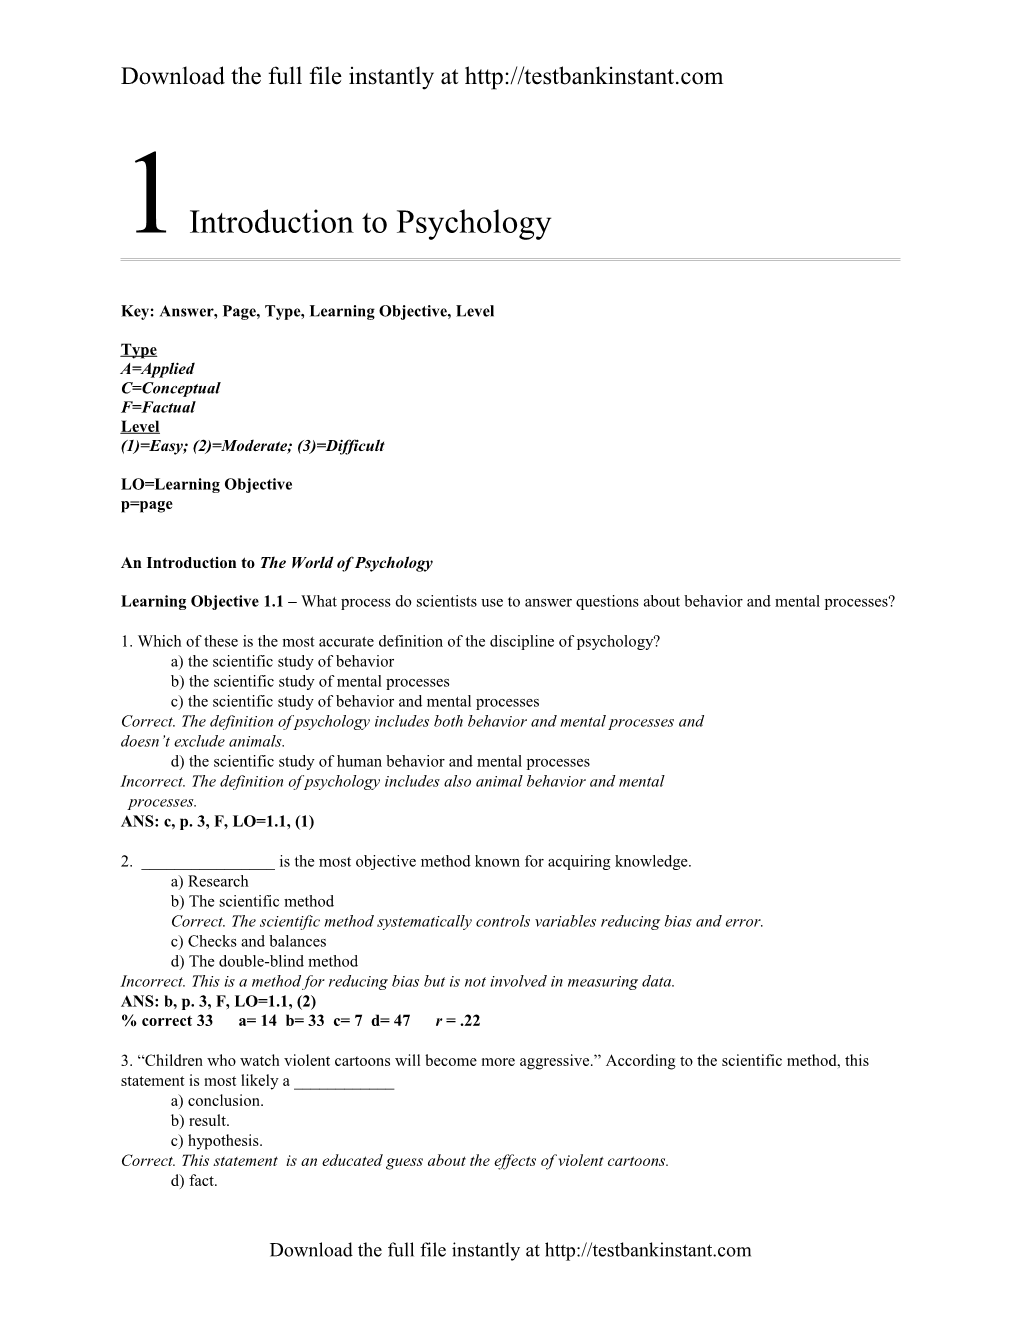 1 Introduction to Psychology